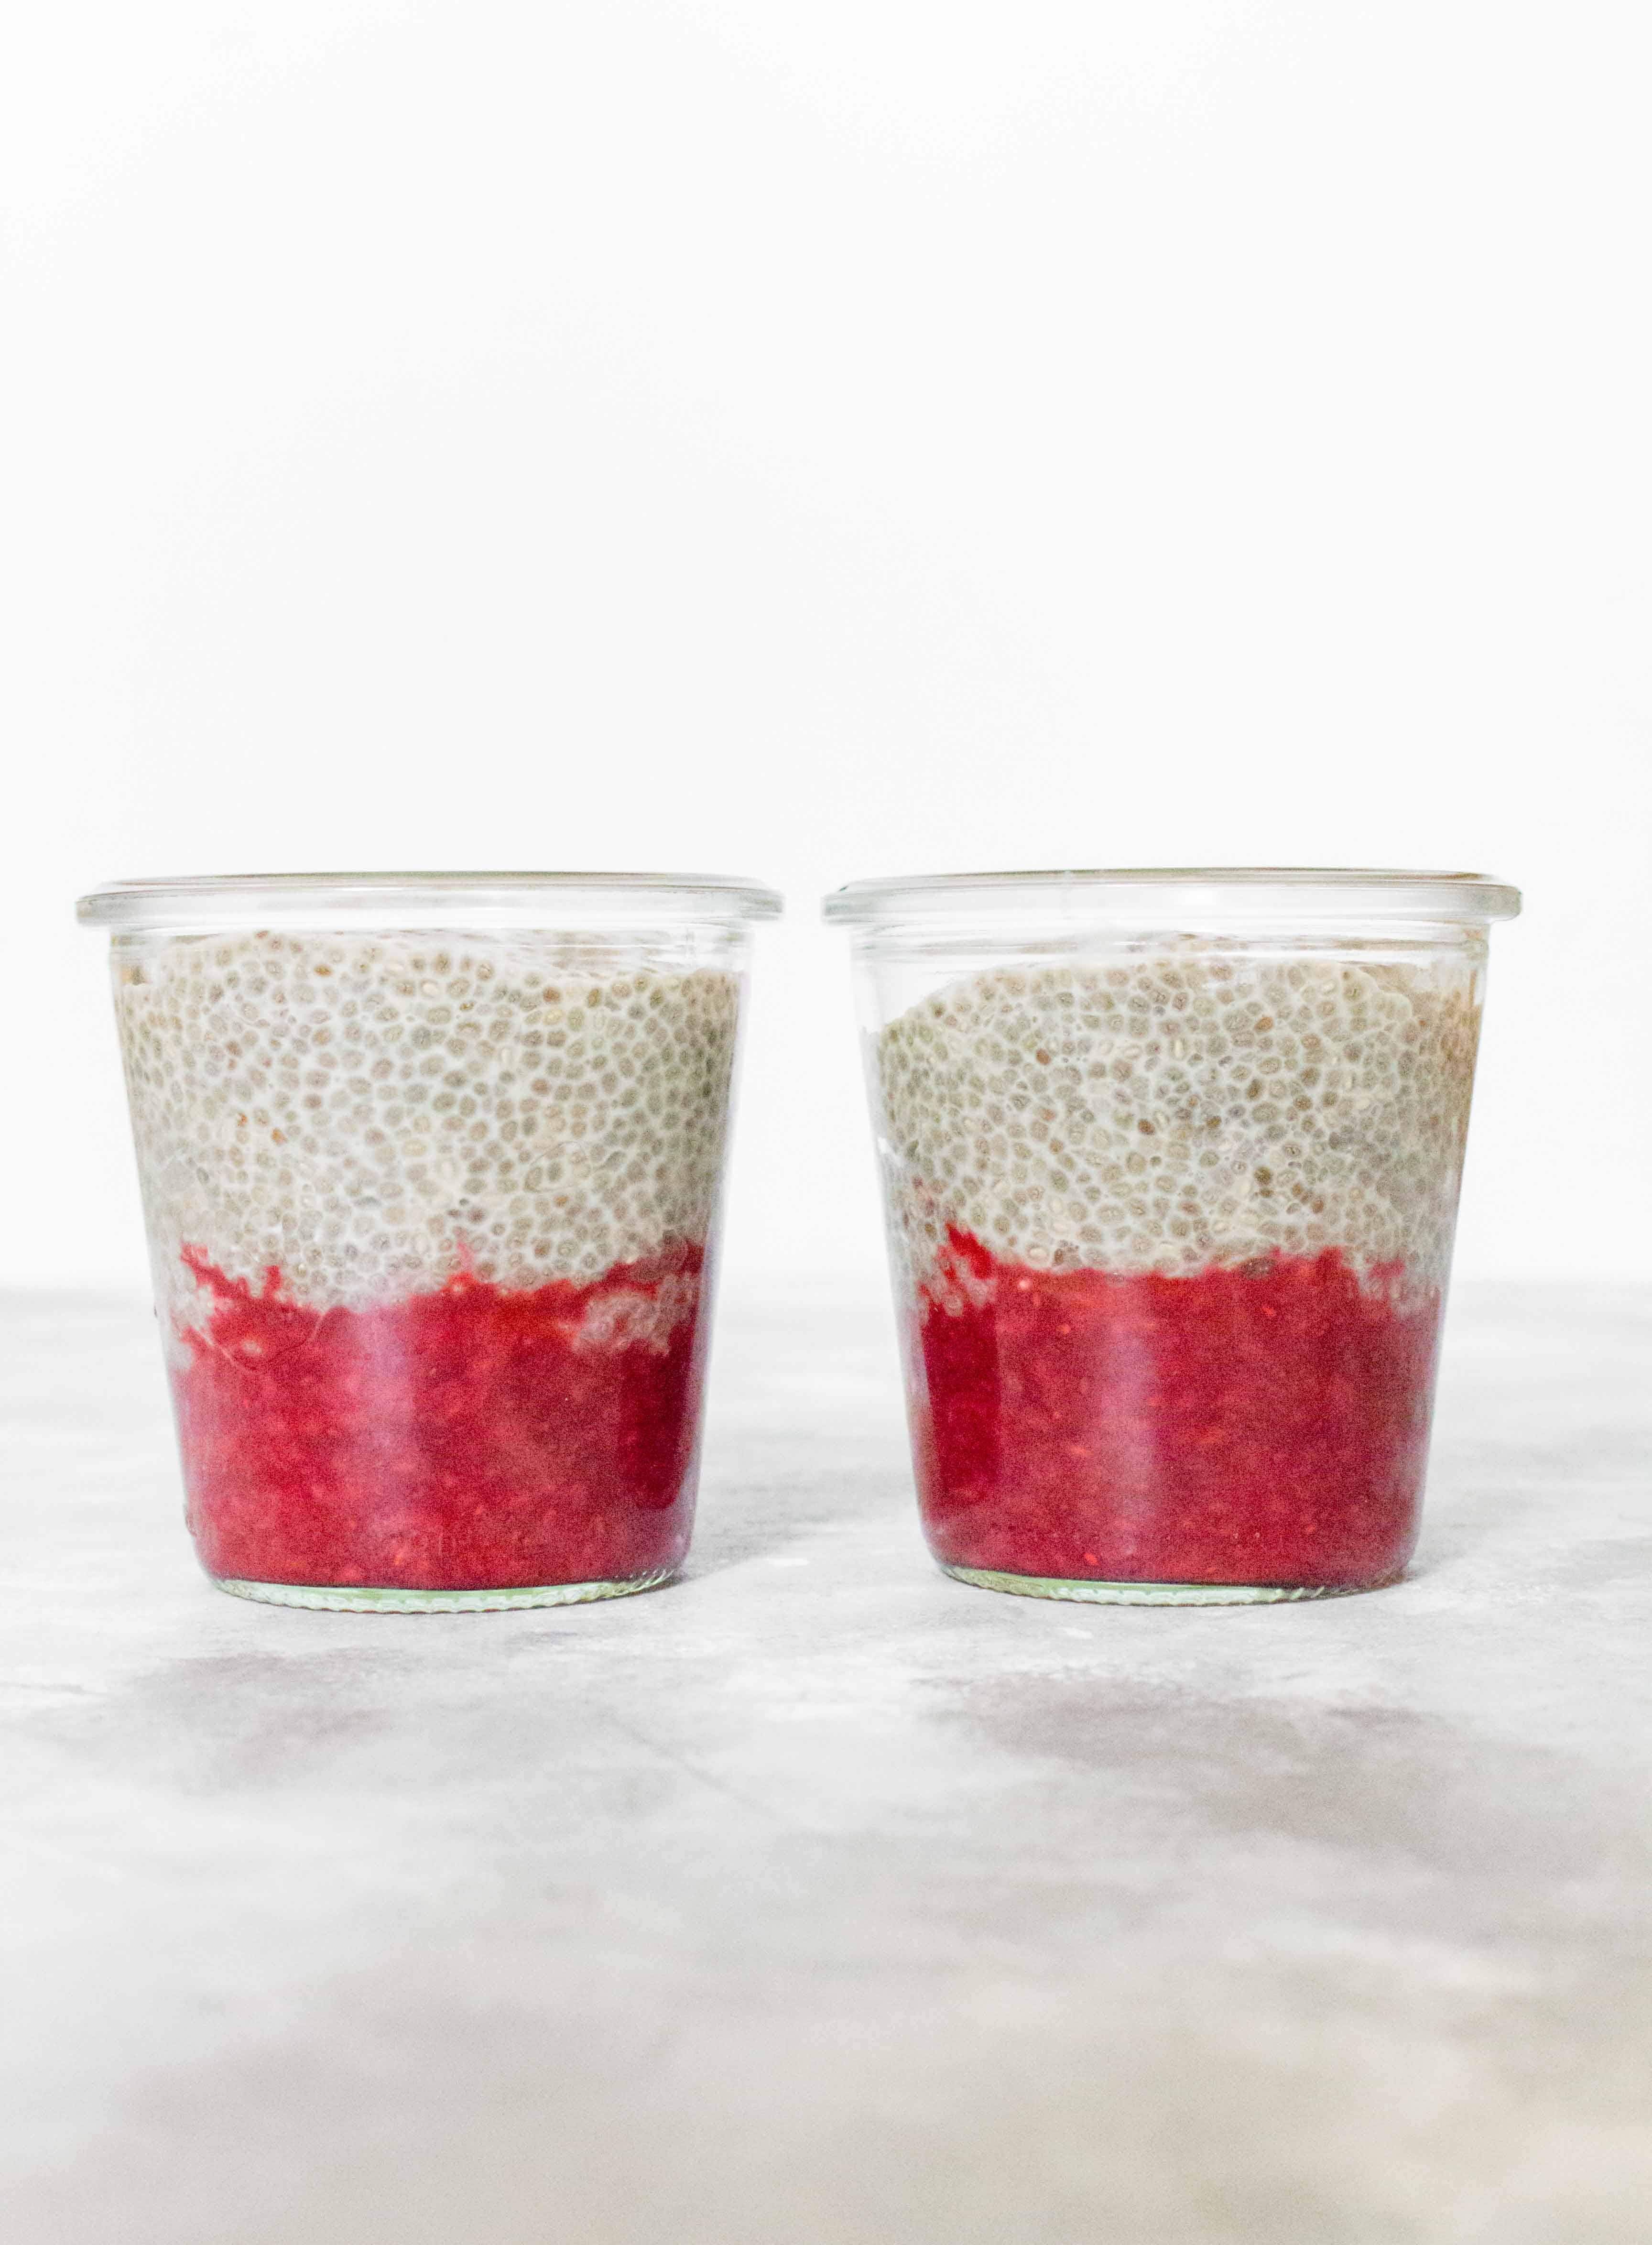 How To Make The Perfect Chia Pudding